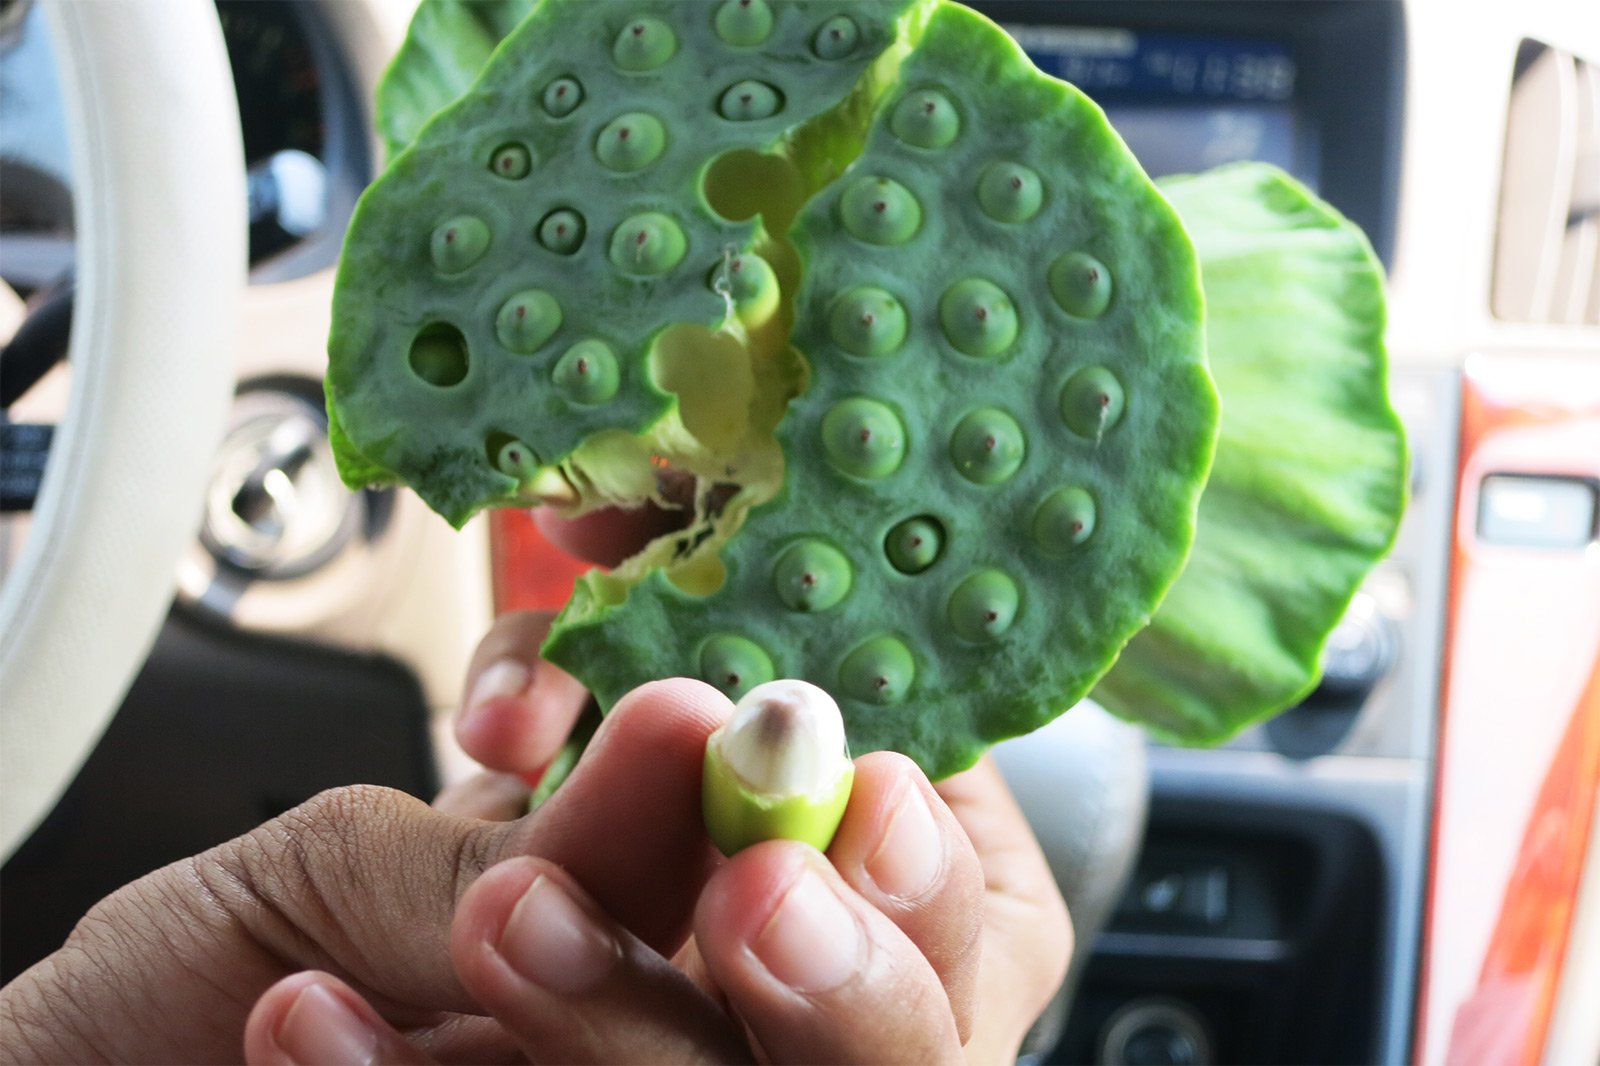 How to try some lotus seeds on Koh Samui